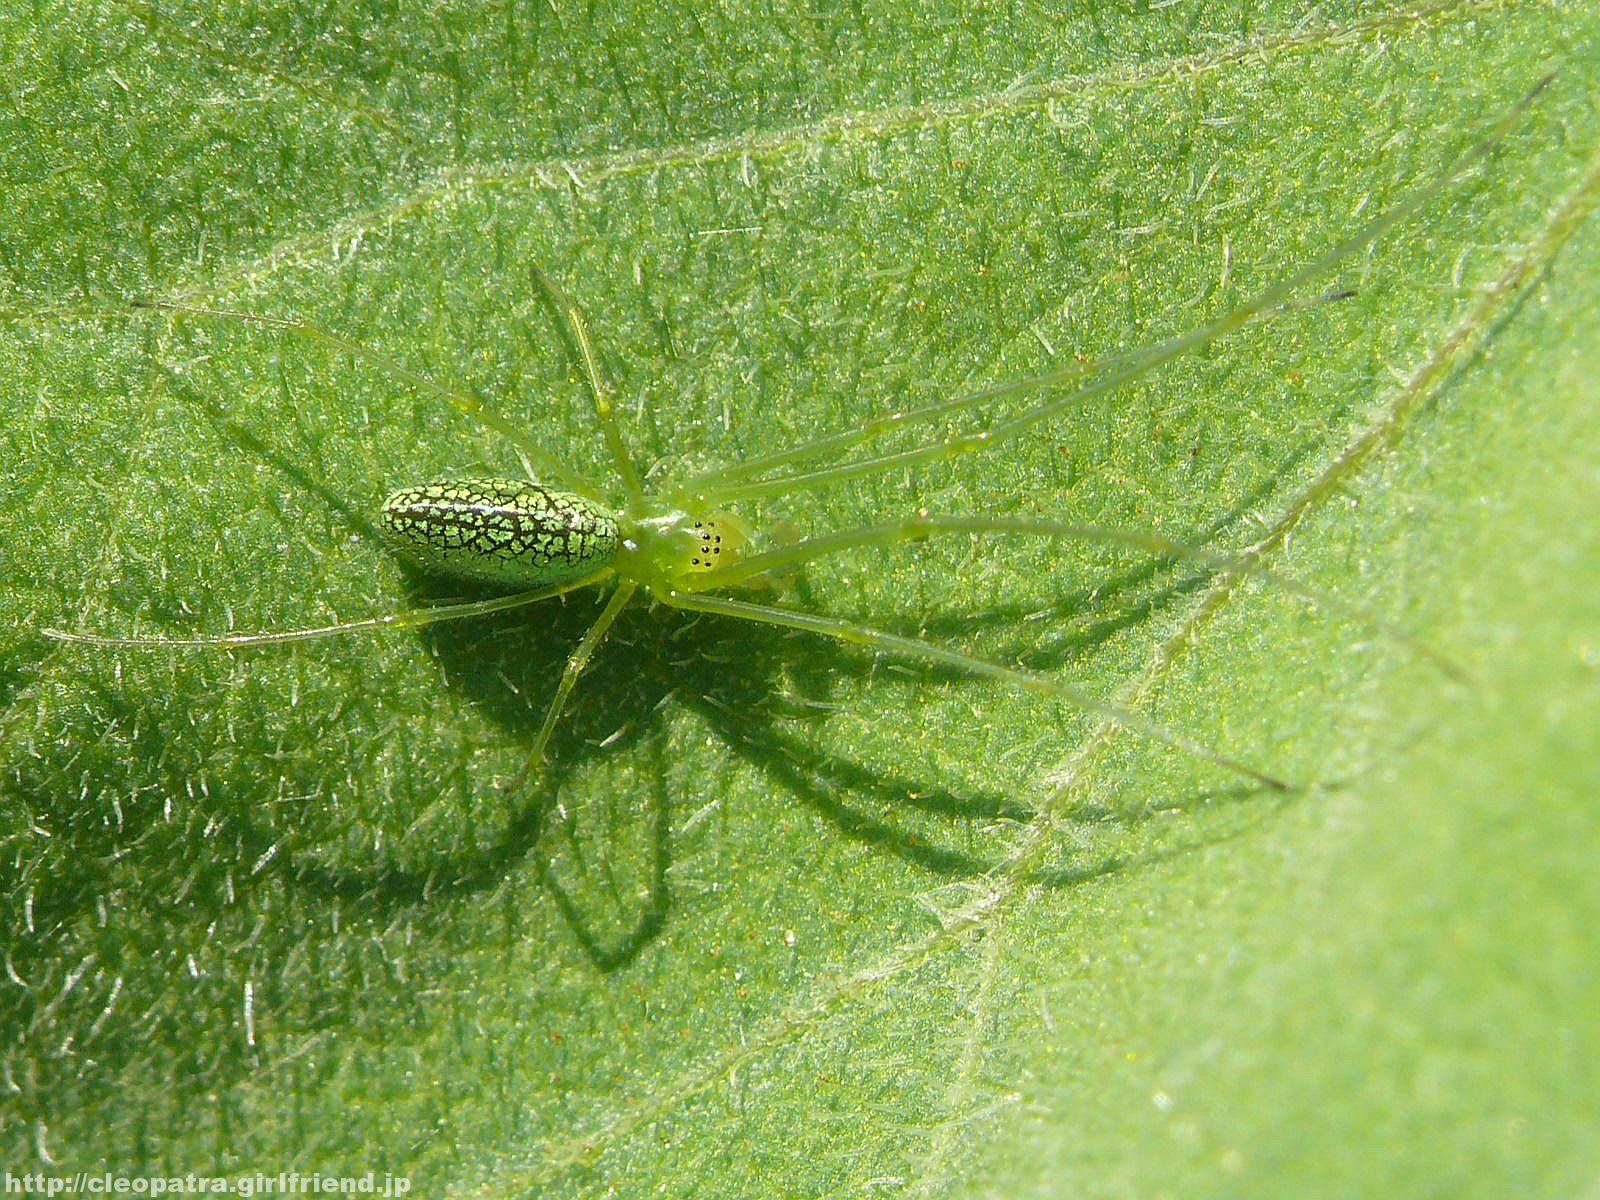 Green Spider すごく足の長い緑色のクモ 2967s Insects Nature